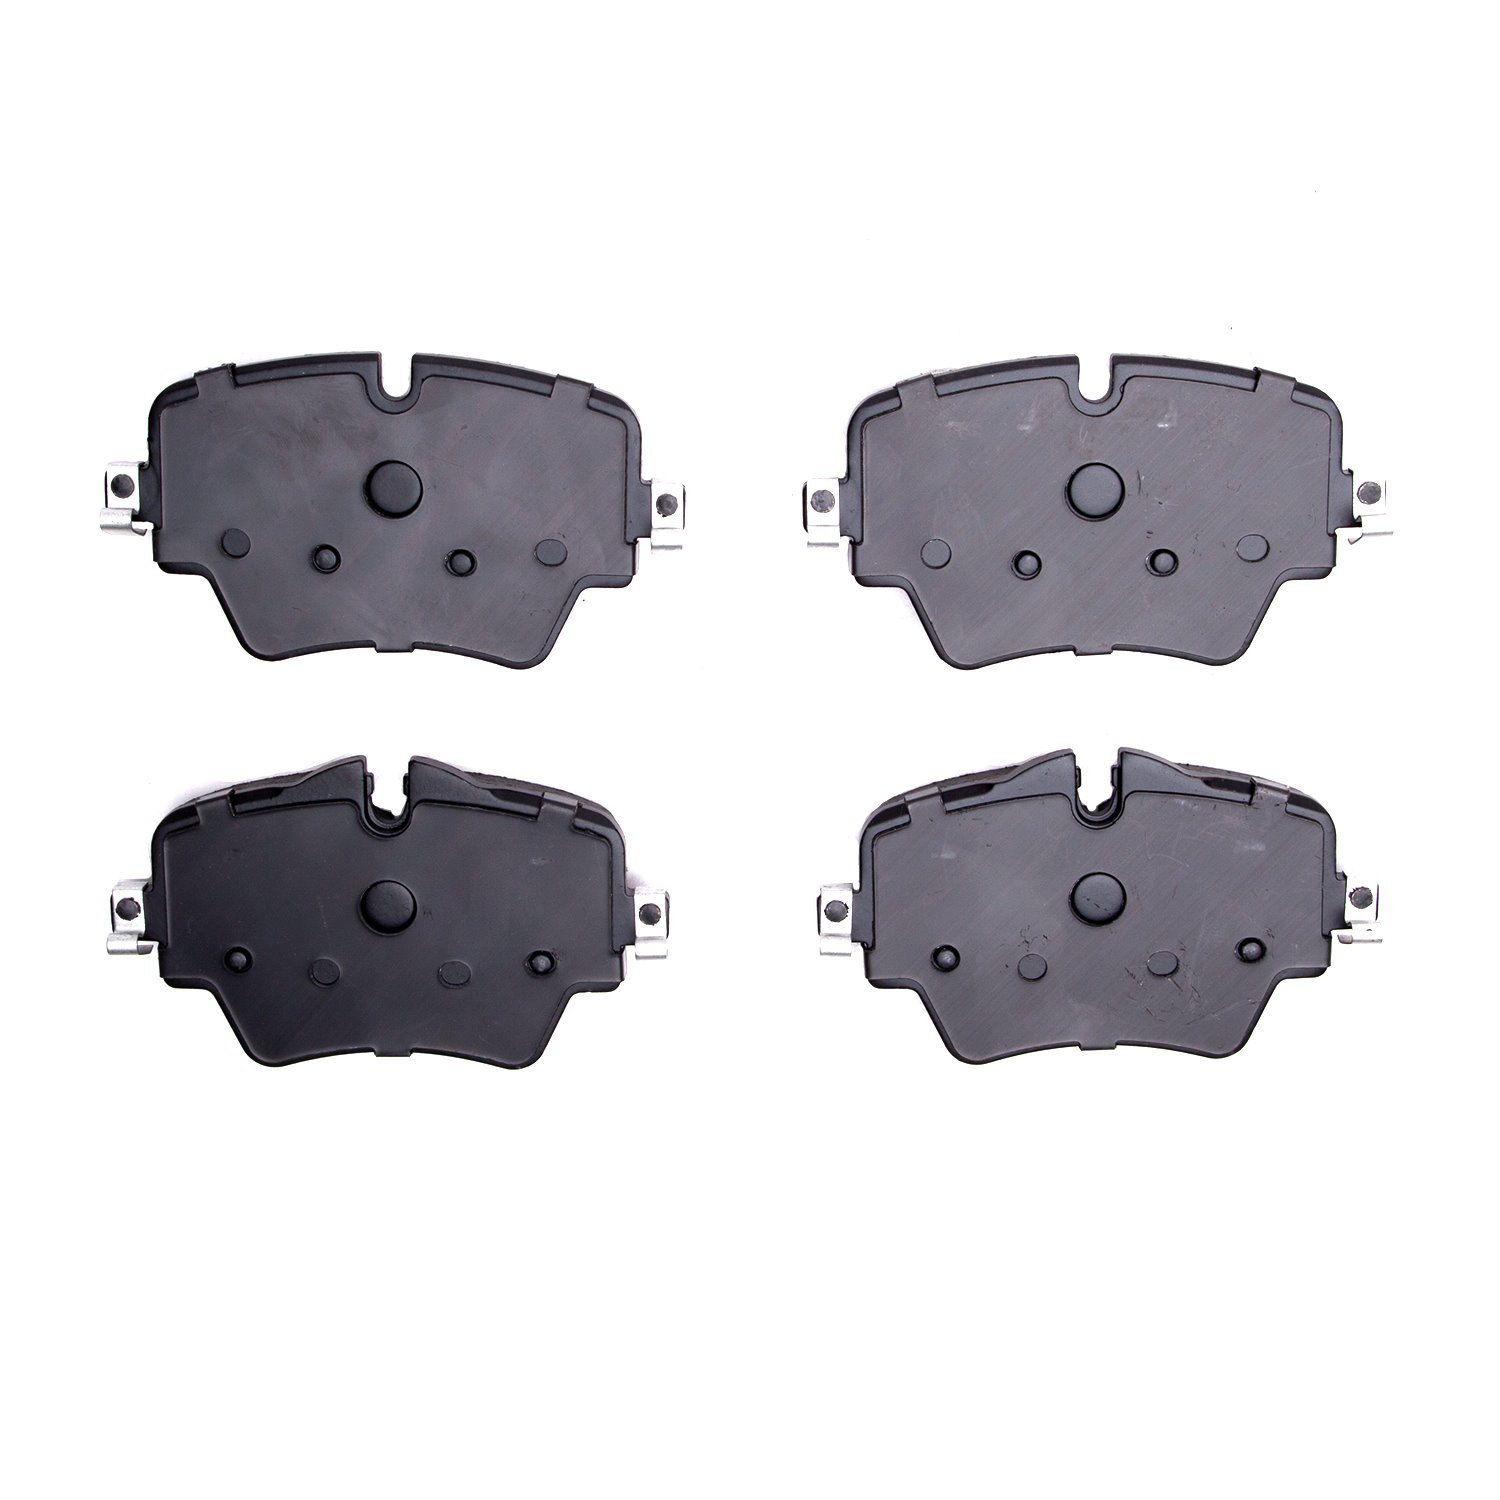 1311-1892-00 3000-Series Semi-Metallic Brake Pads, Fits Select Multiple Makes/Models, Position: Front